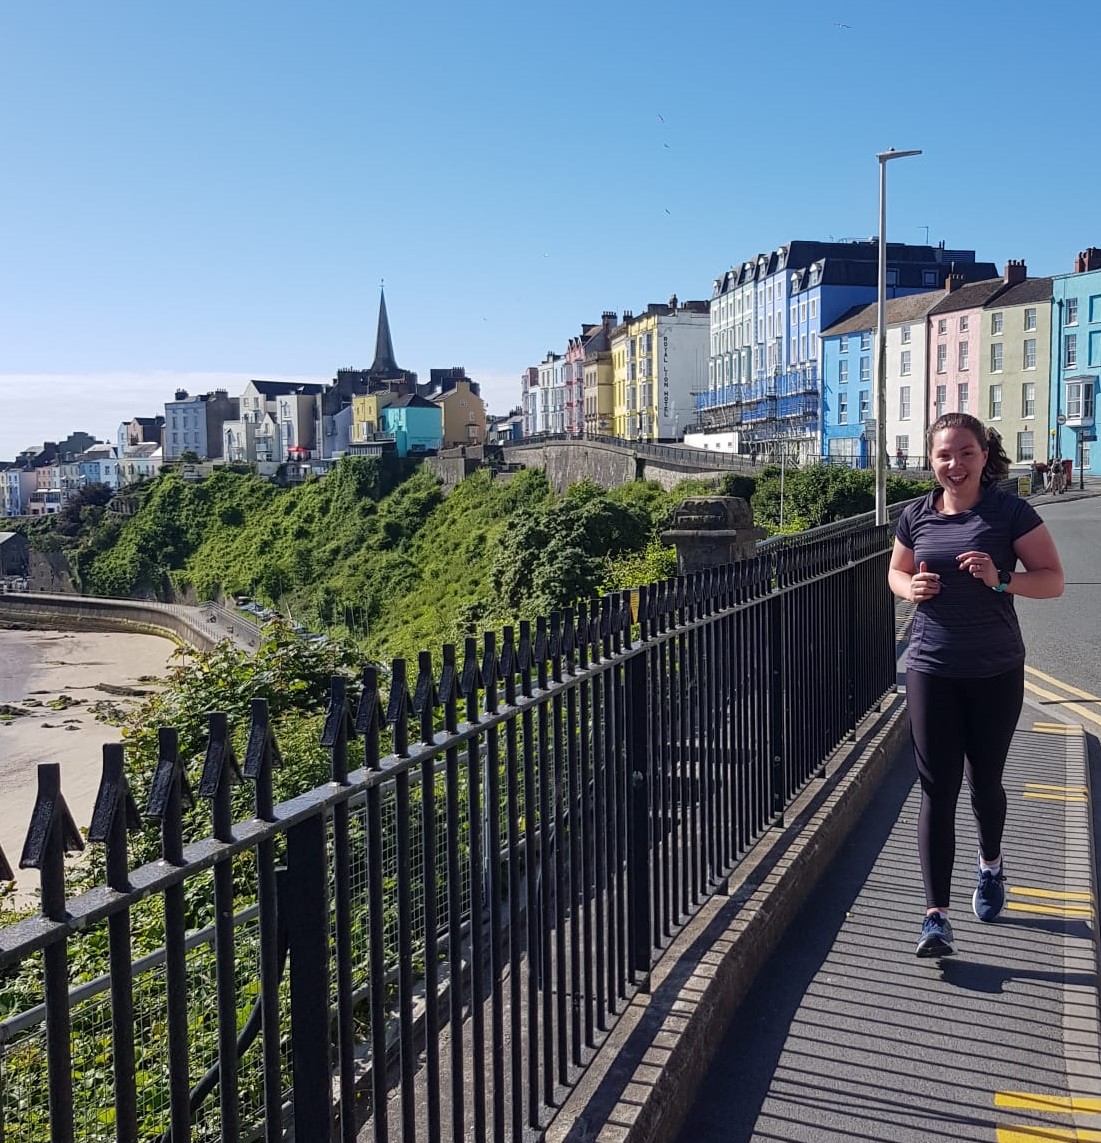 Kirsty running in Tenby